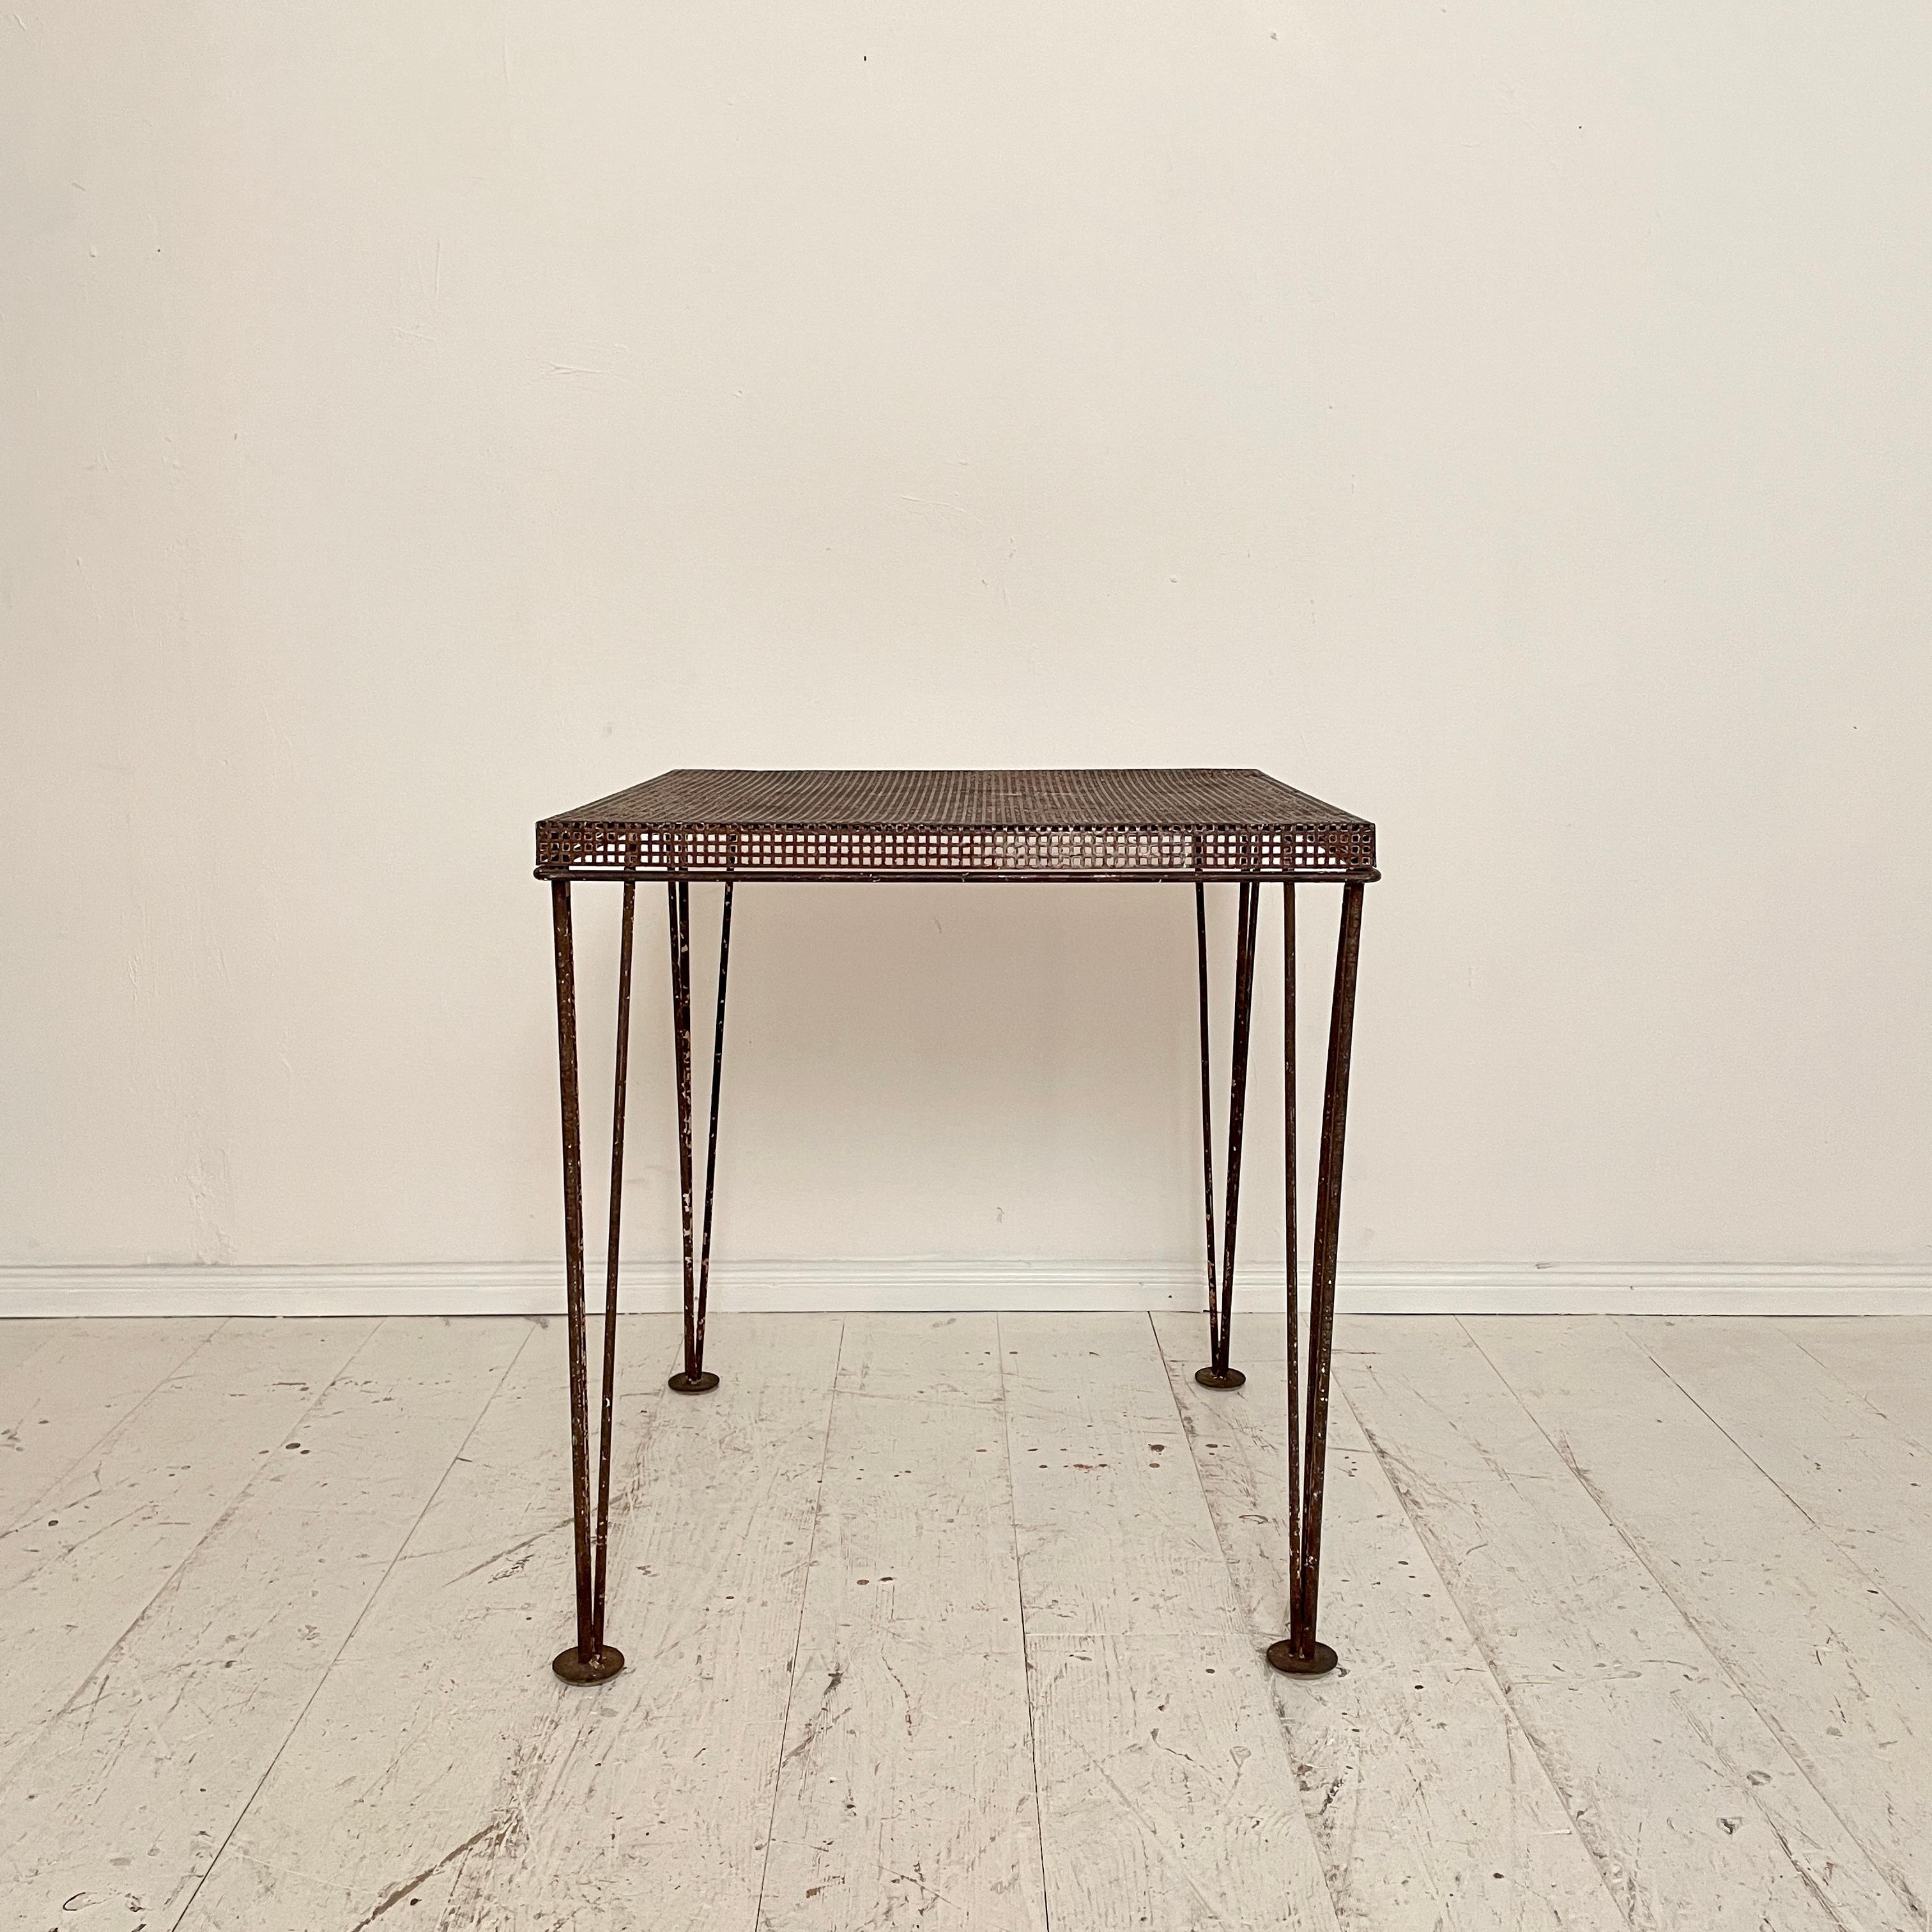 This great Brutalist French iron side table, was made around 1960. The frame is made of iron and the table top is made of iron perforated plate.
A unique piece which is a great eye-catcher for your antique, modern, Space Age or mid-century